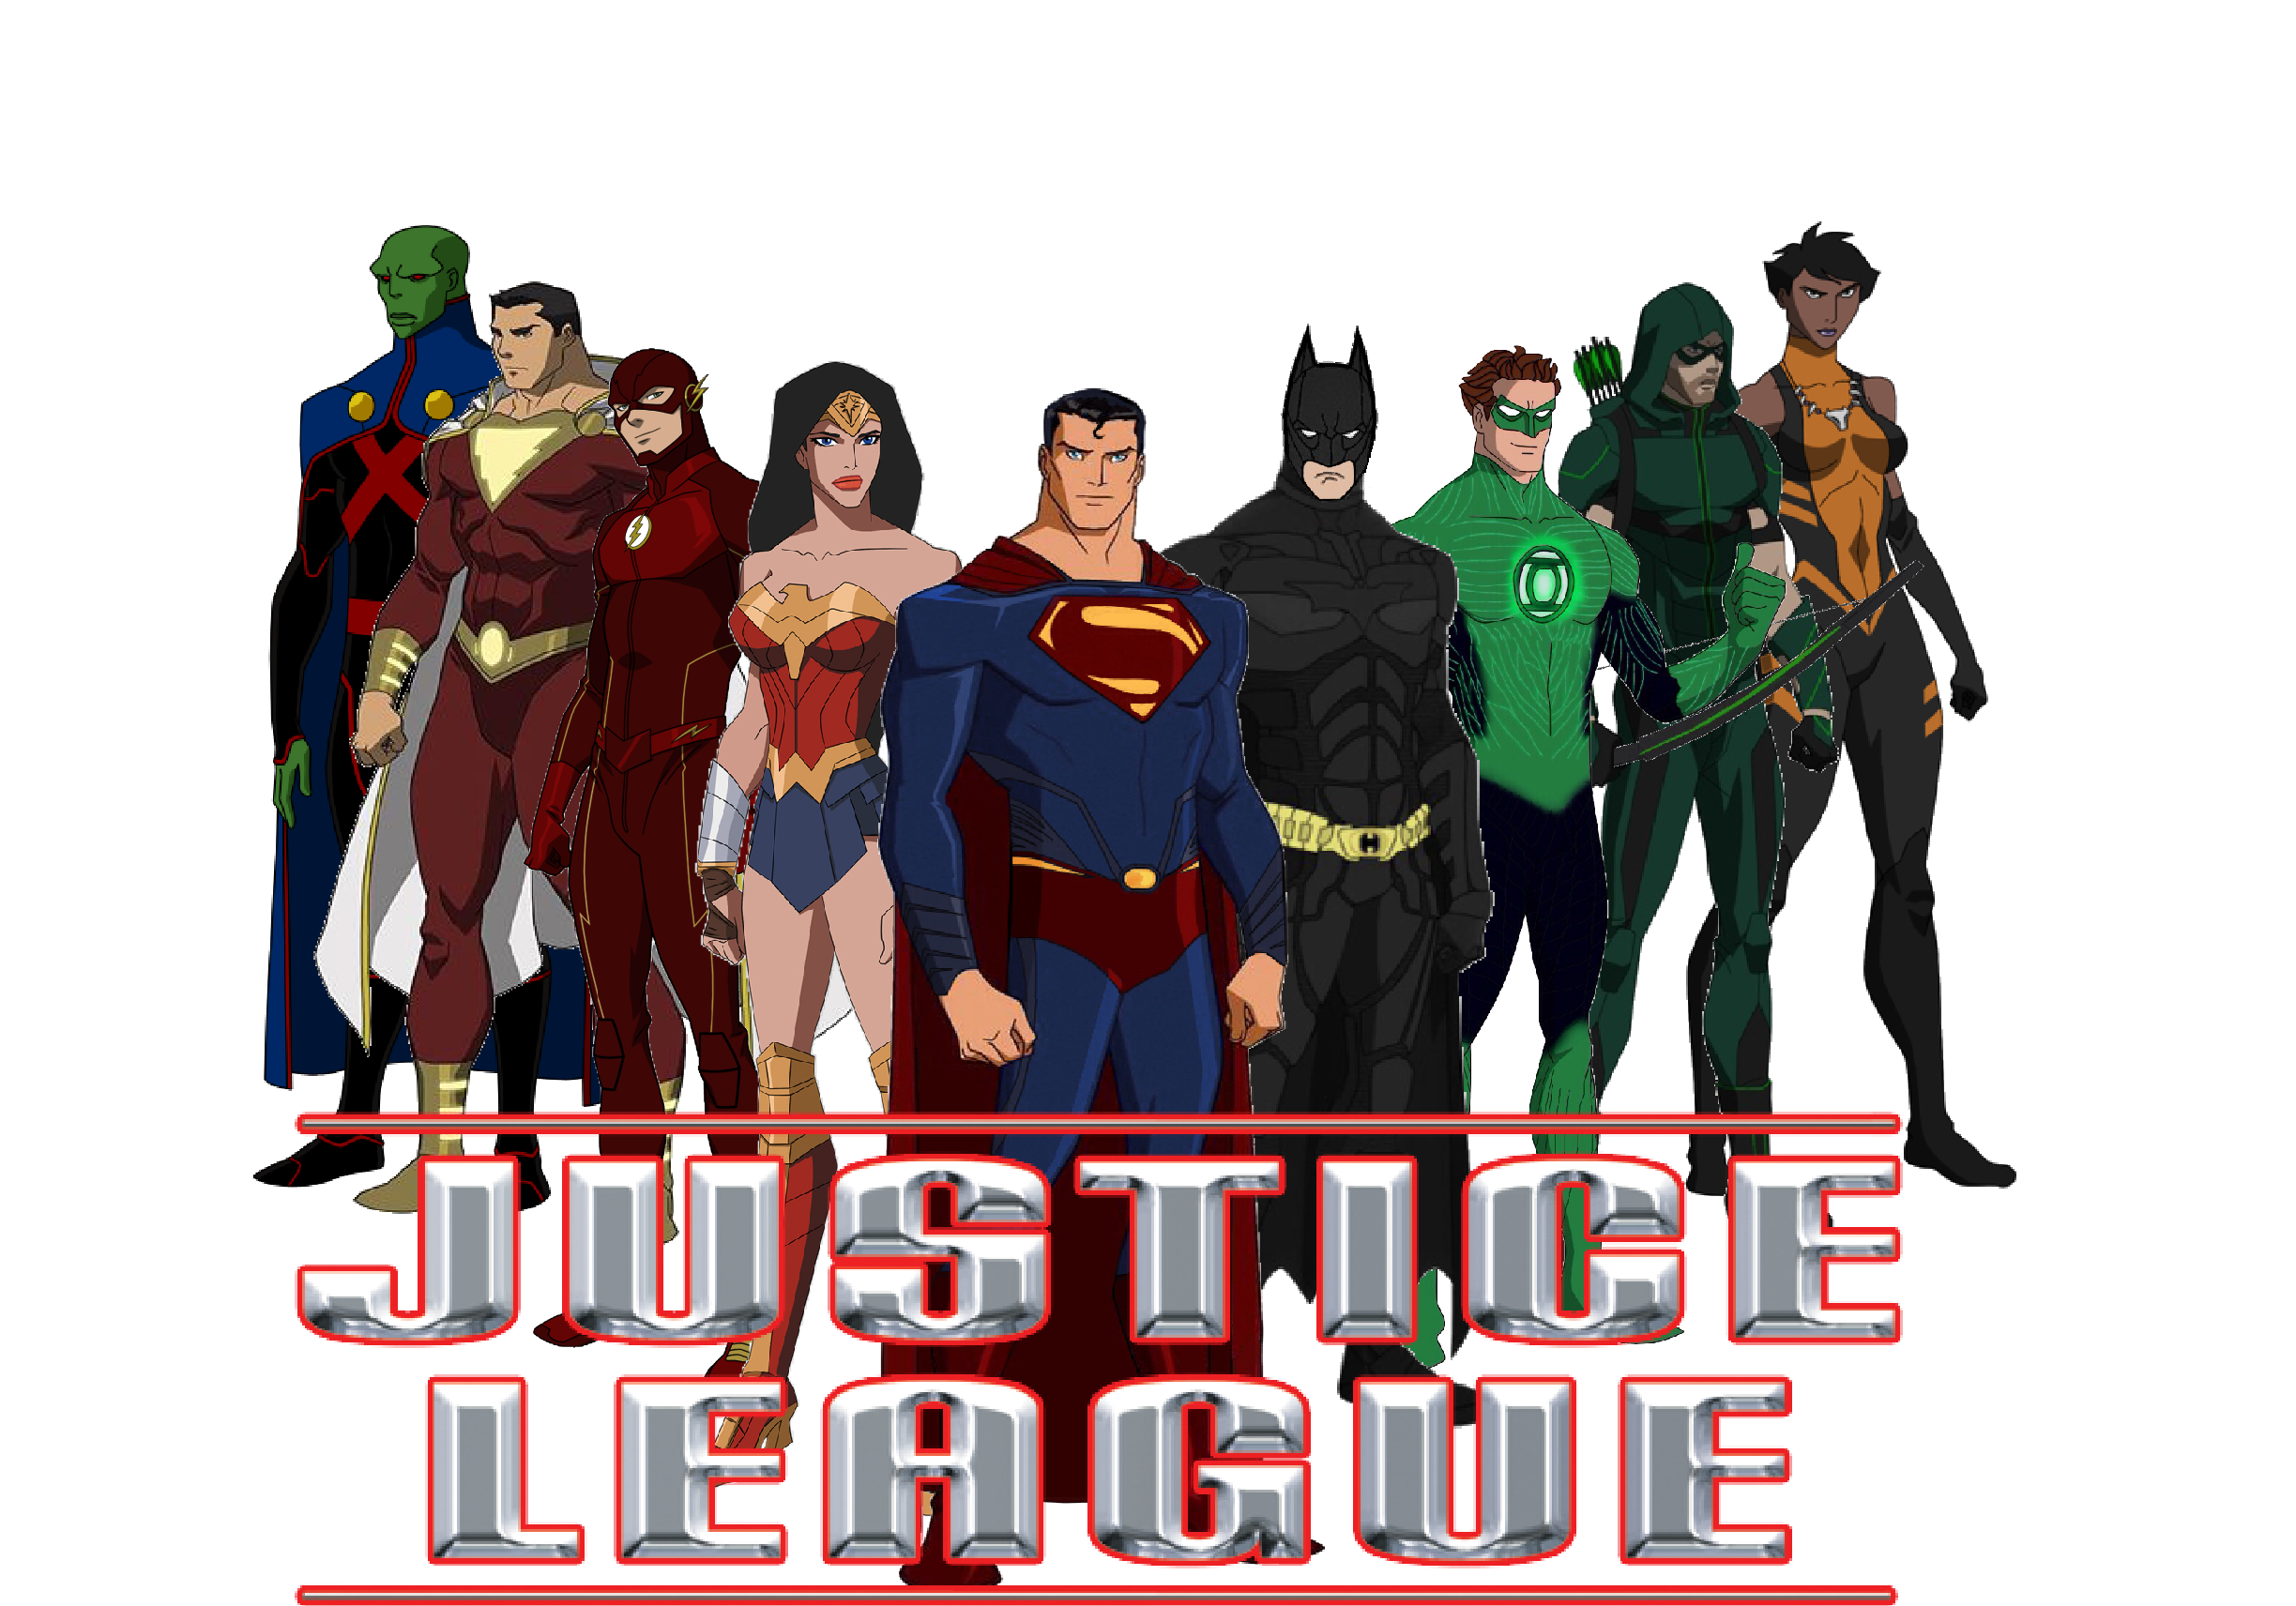 JUSTICE LEAGUE by Crossovercomic on DeviantArt